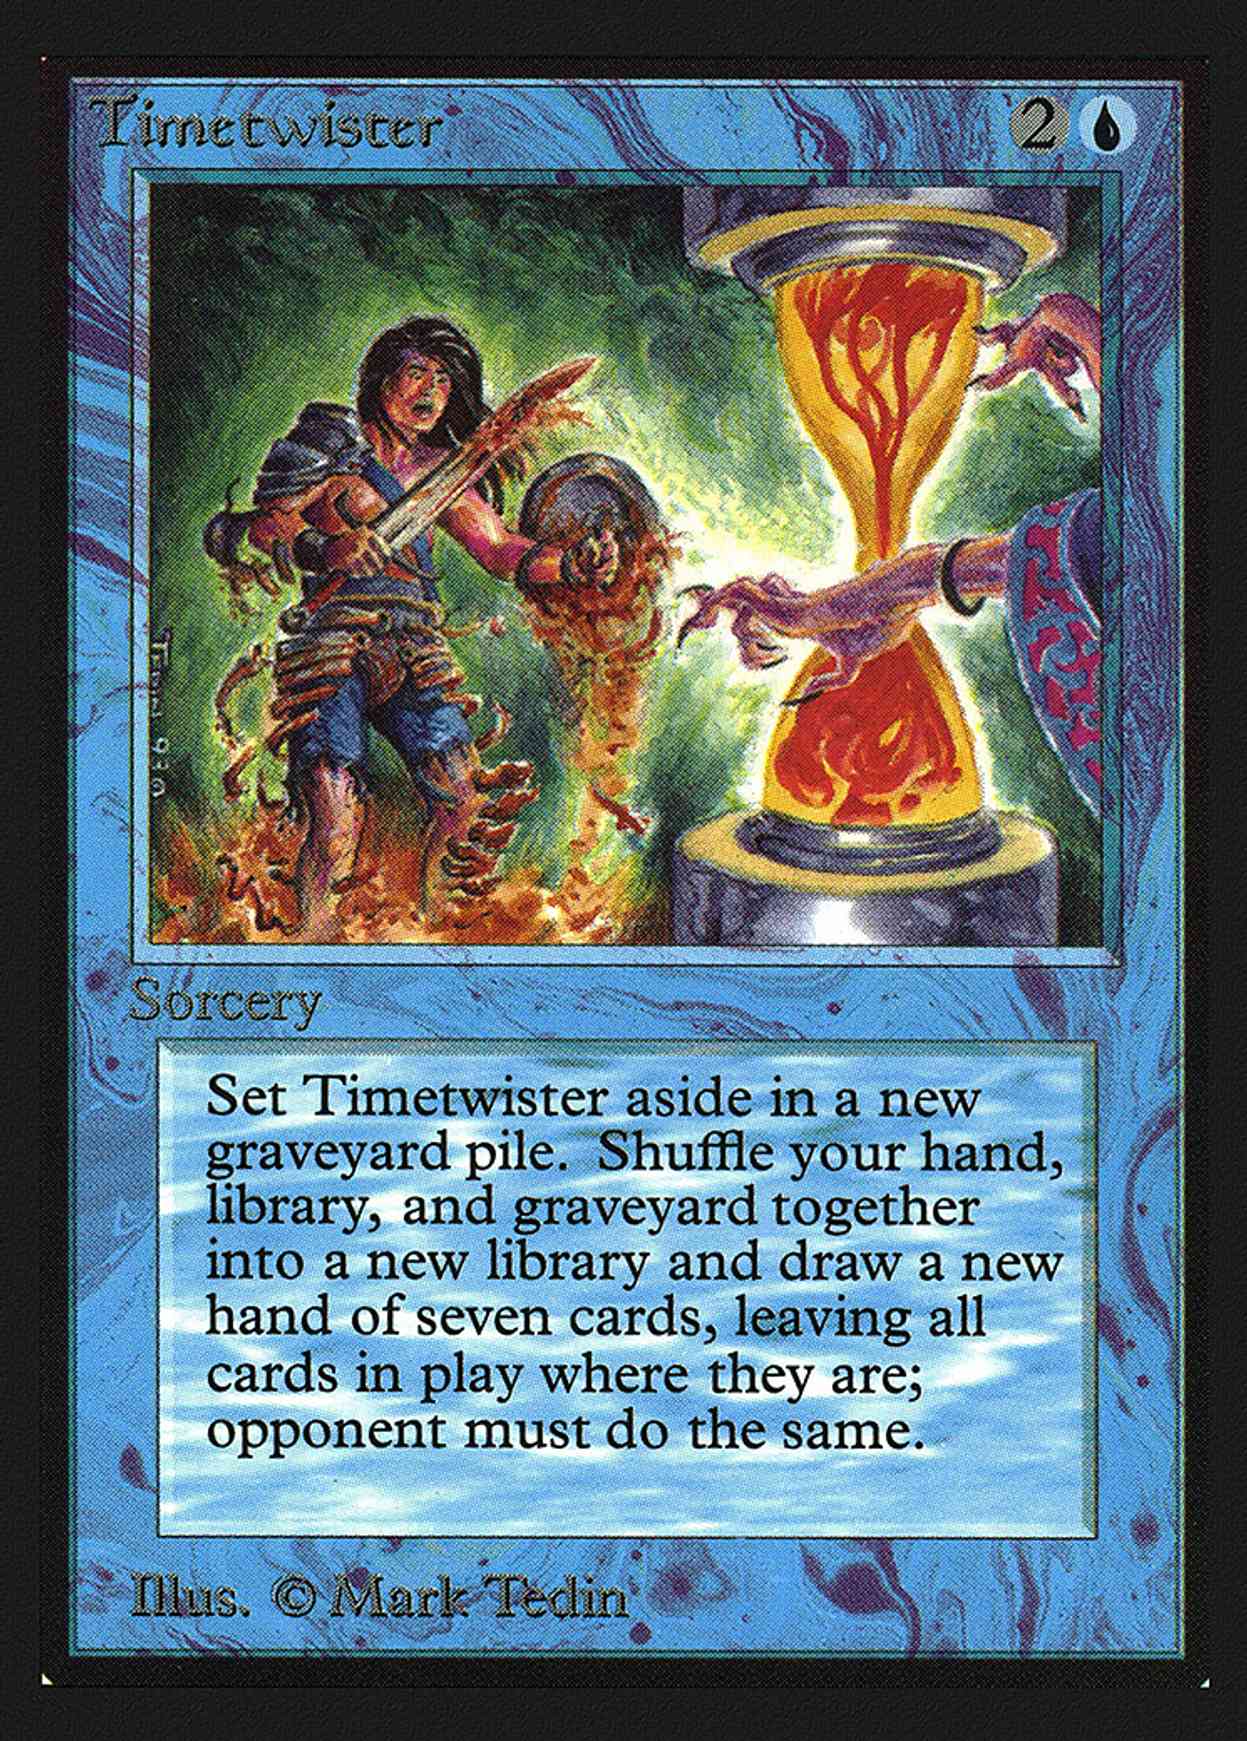 Timetwister (IE) Price from mtg International Edition